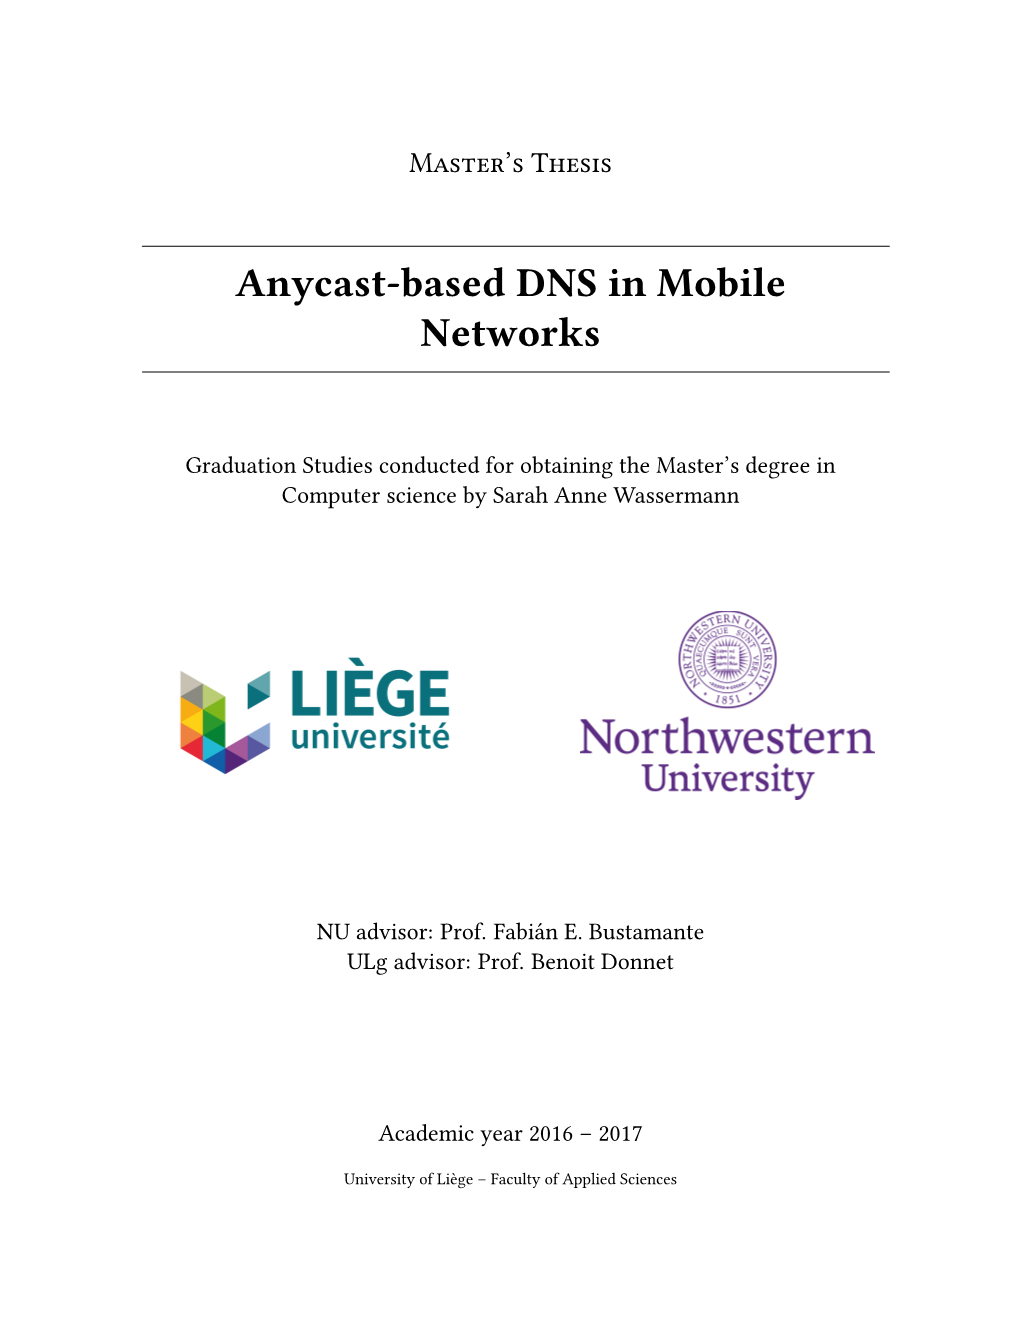 Master's Thesis – Anycast-Based DNS in Mobile Networks